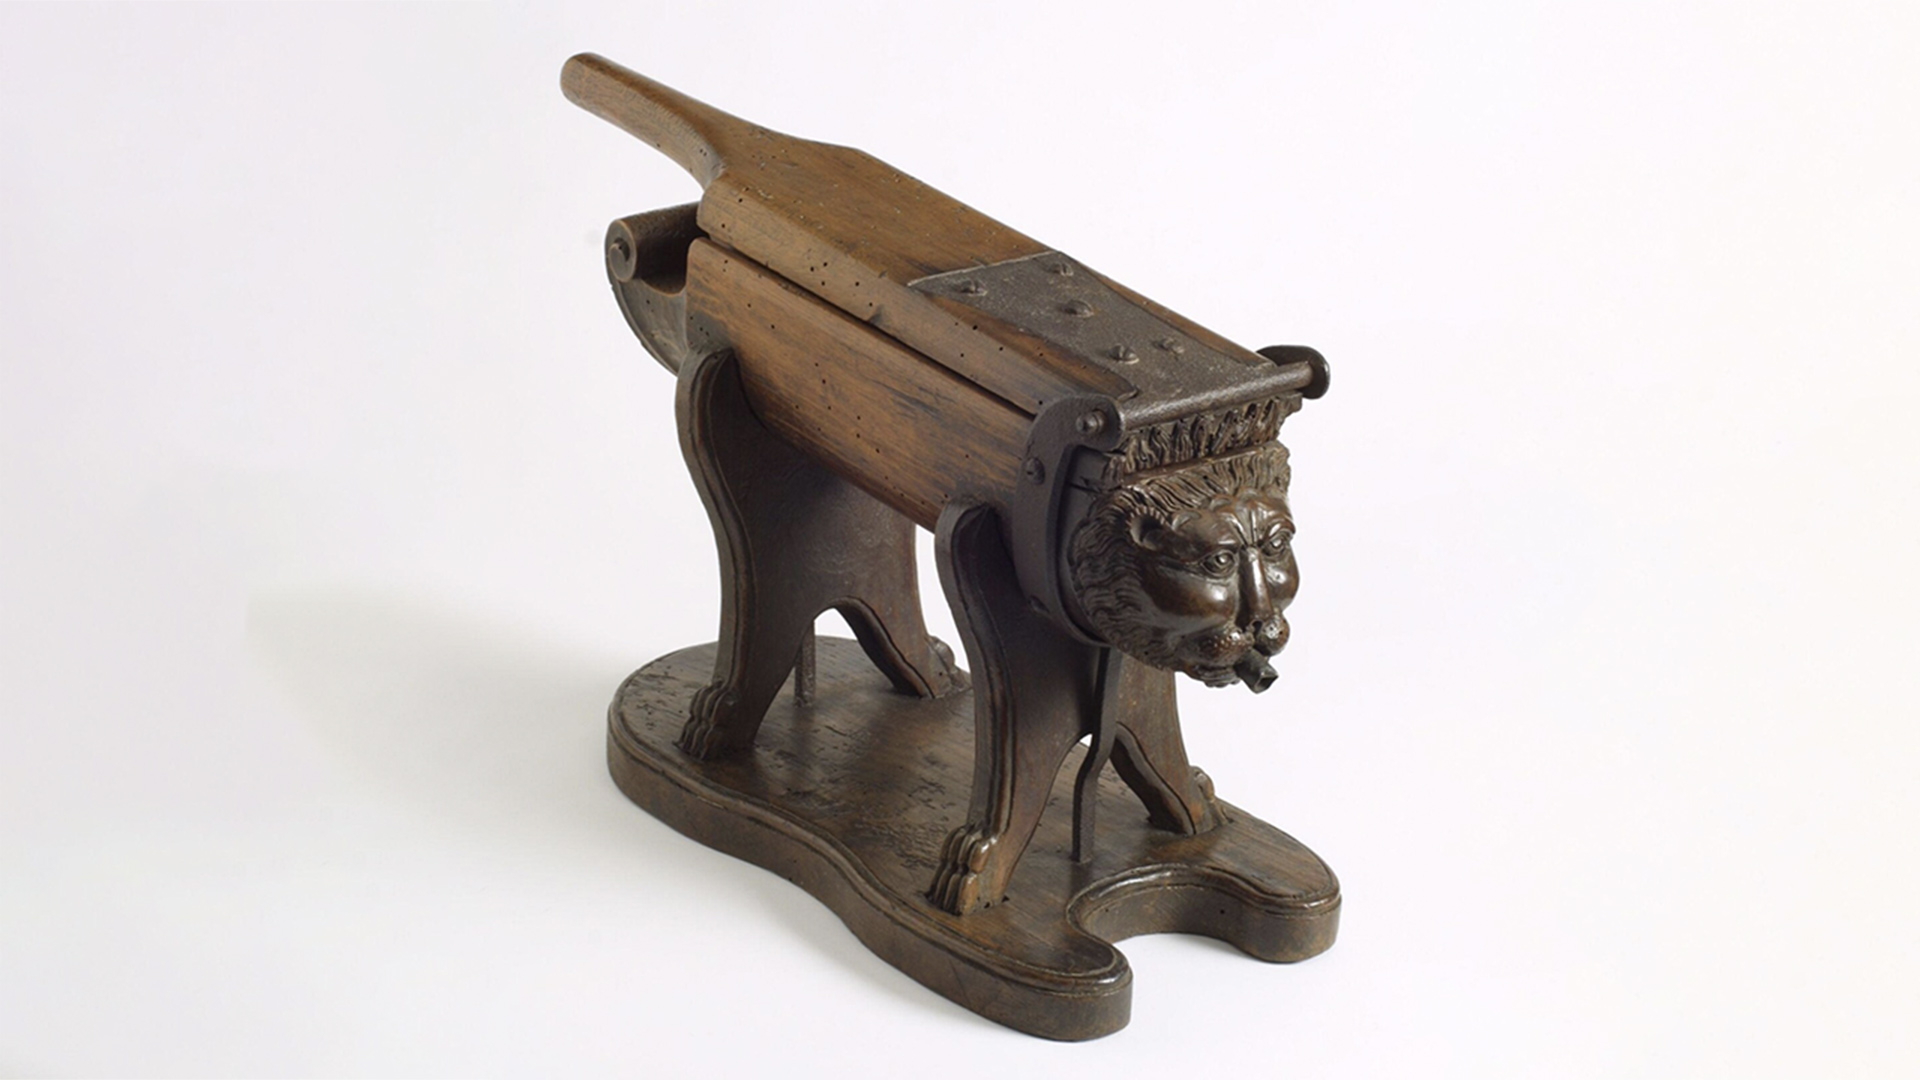 Wooden lion with a flat hinged handle on top